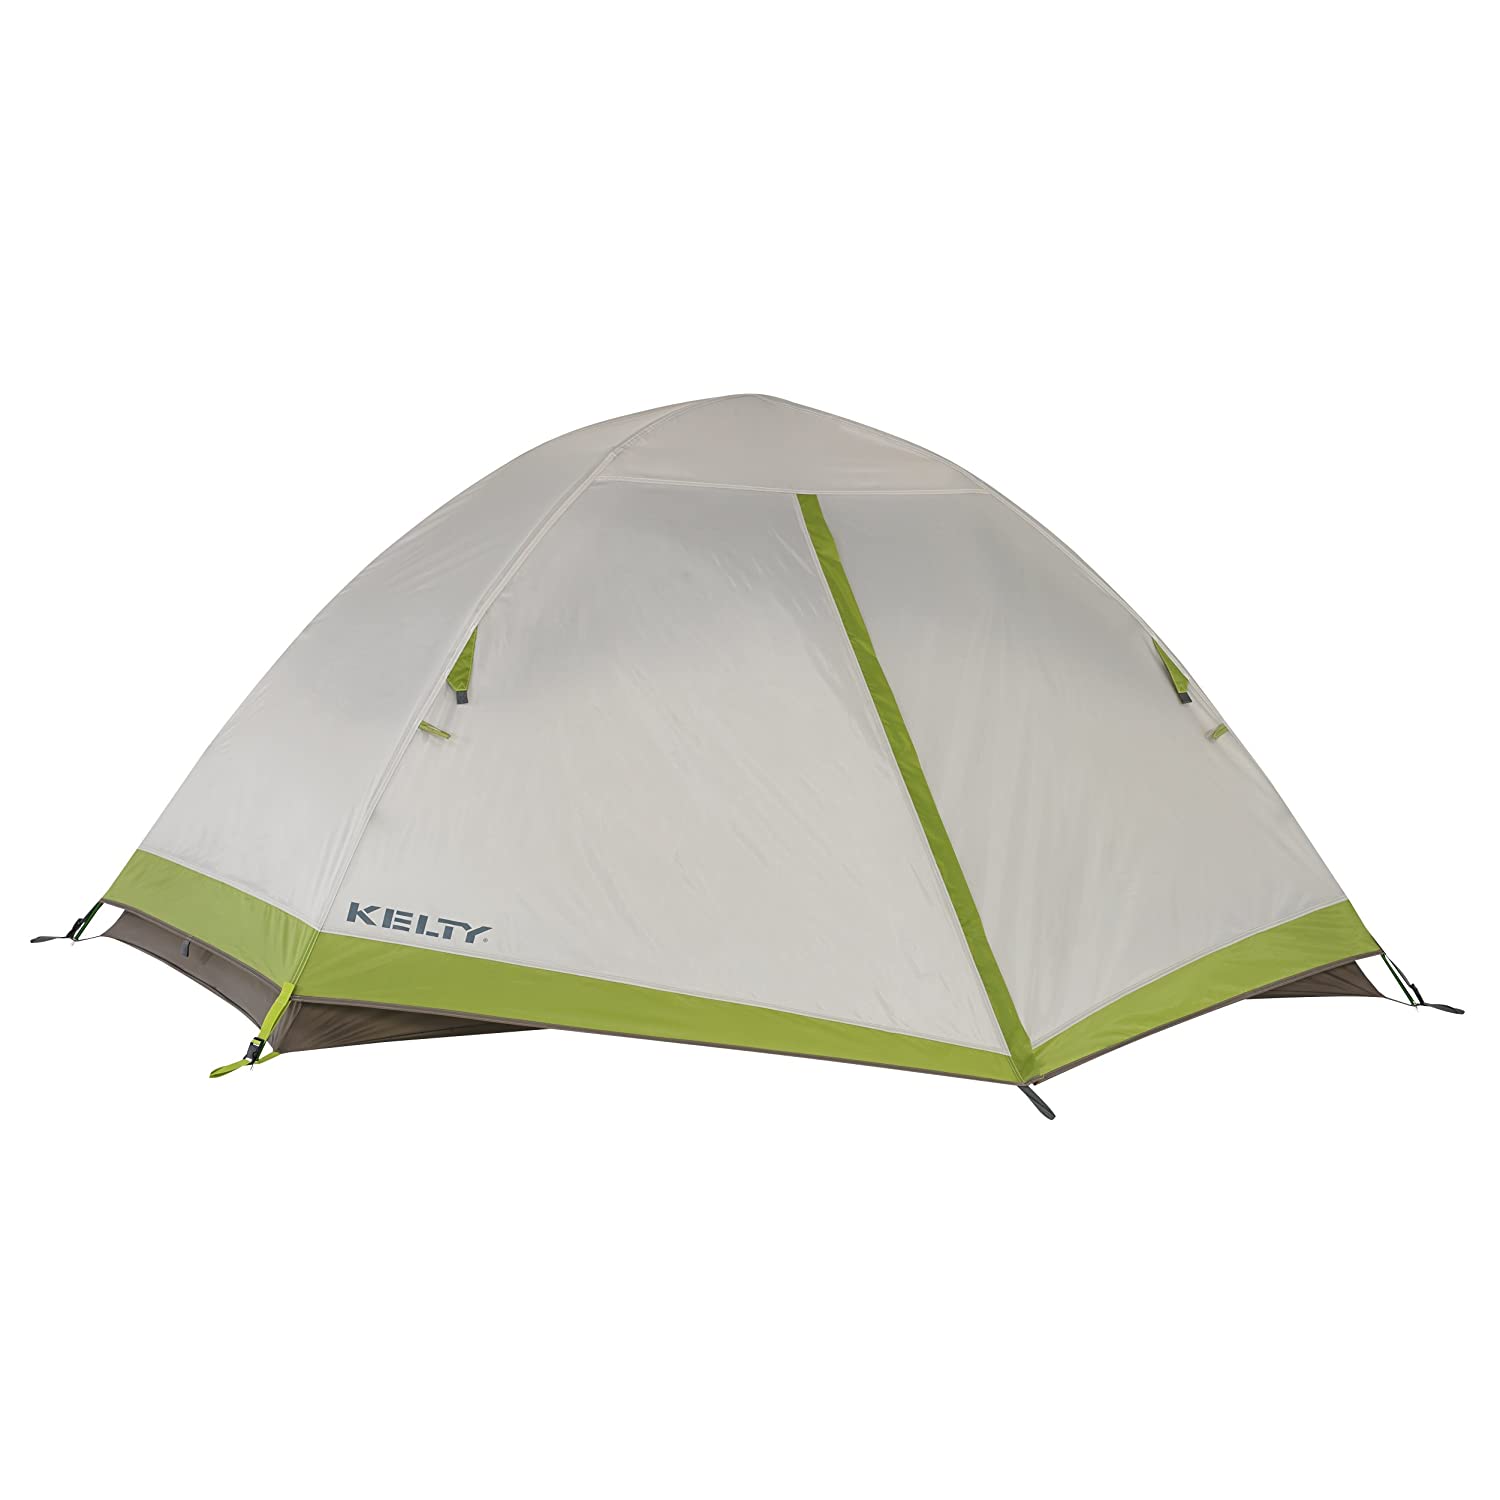 Kelty Salida Compact Backpacking Tent, 2-Person